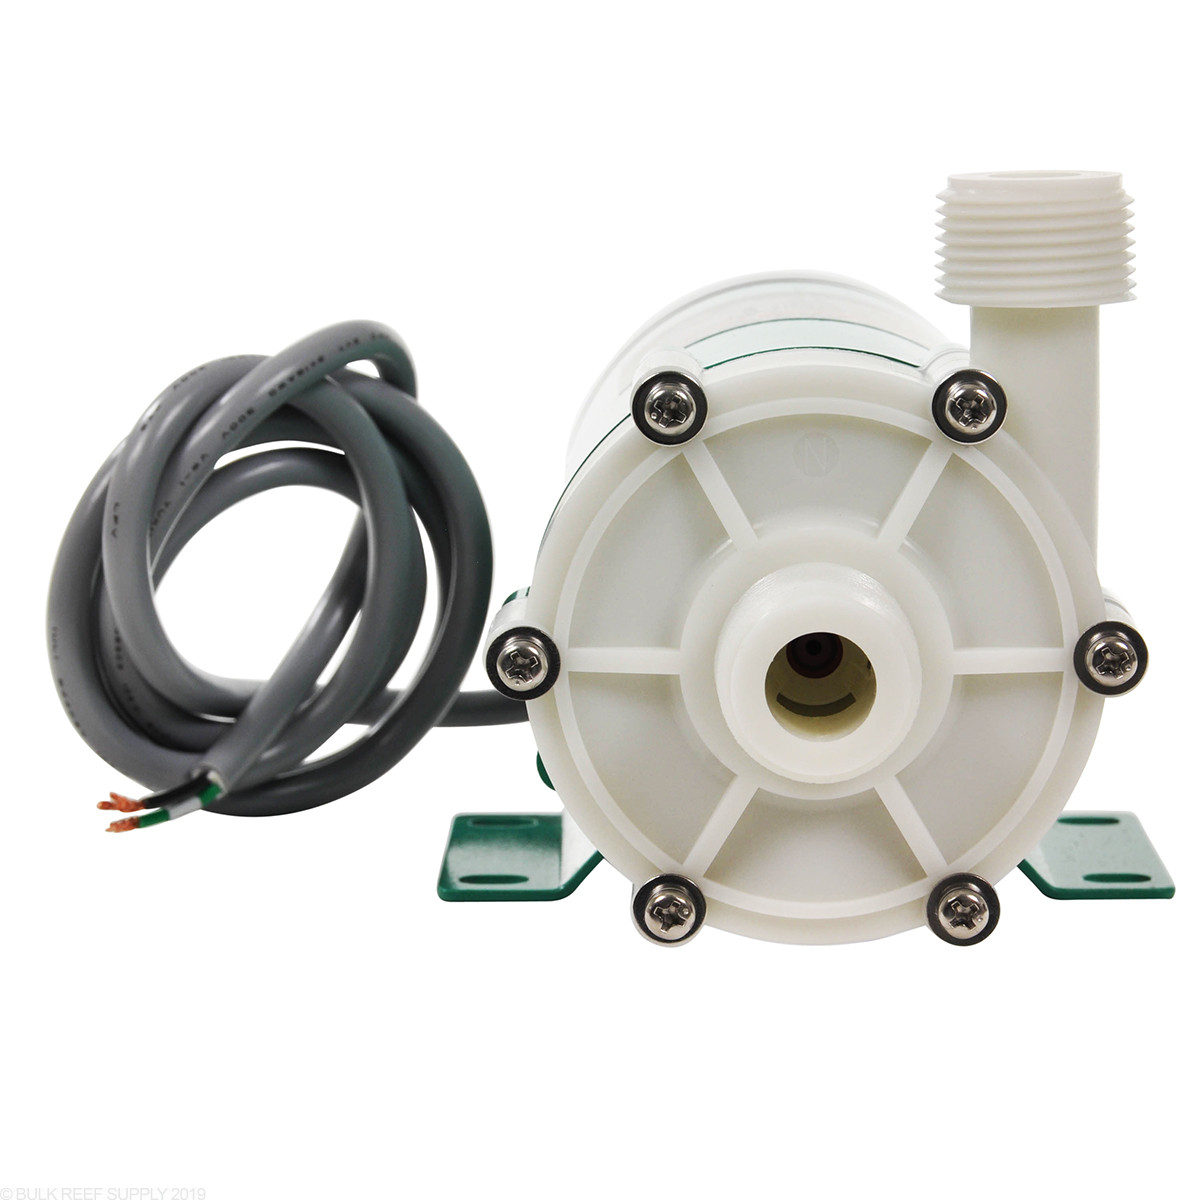 ??? ???? Iwaki - Iwaki MP Sanwa Series Magnetic Drive Pumps - Pump ... / Owing to their remarkable efficiency and compact design.